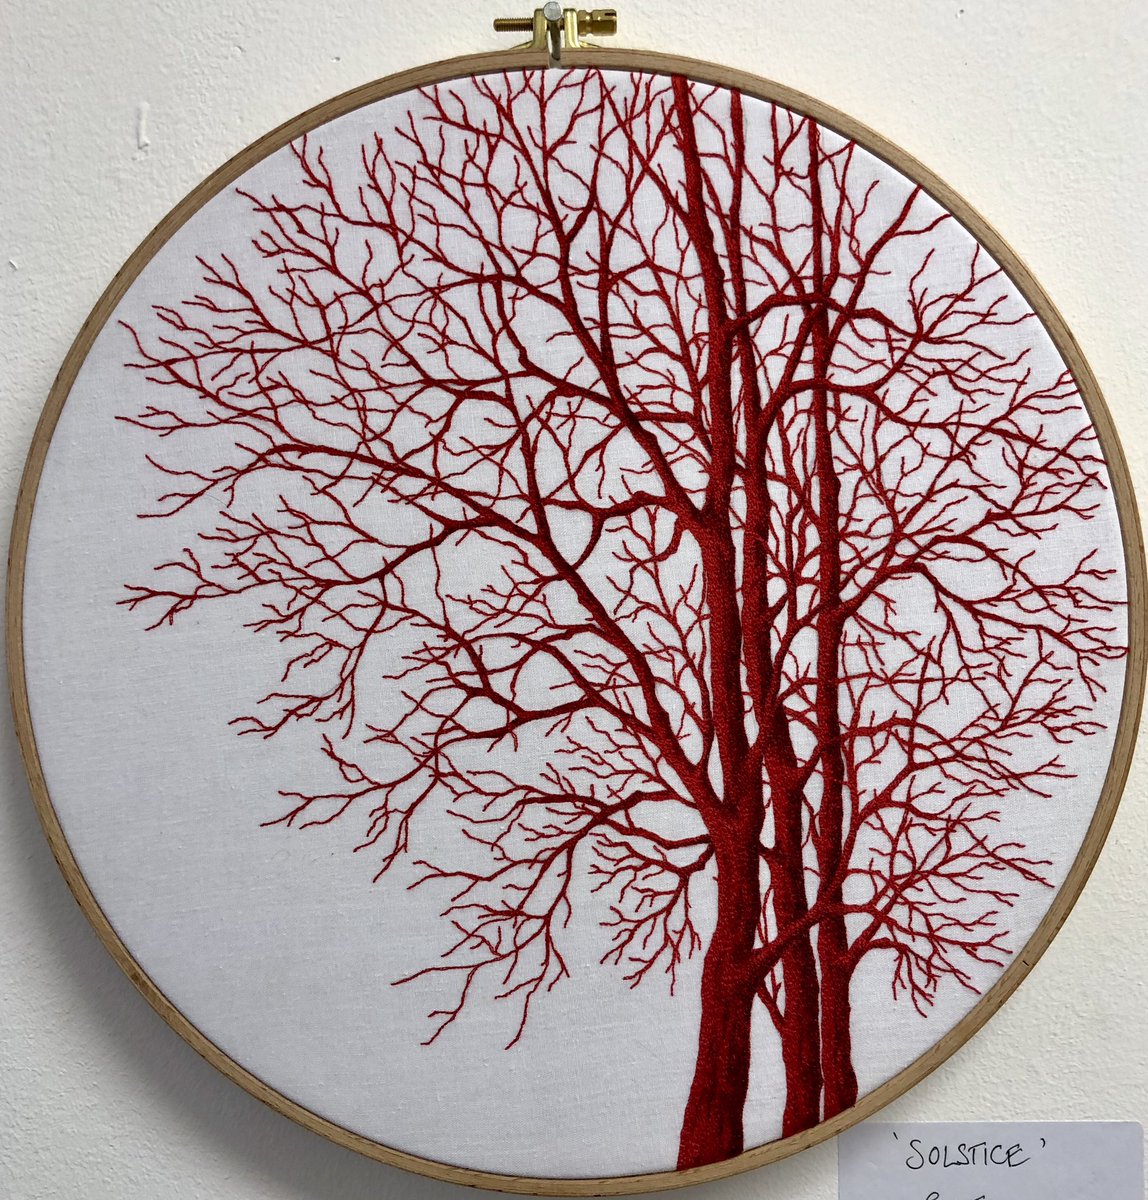 Looking for a unique Christmas gift? 

Here’s another beautiful stitched hoop I currently have available. Can be posted anywhere in the UK.

‘Solstice’
32cm diameter 
£190

#textileart #freemotionembroidery #edinburgh #stitchedart